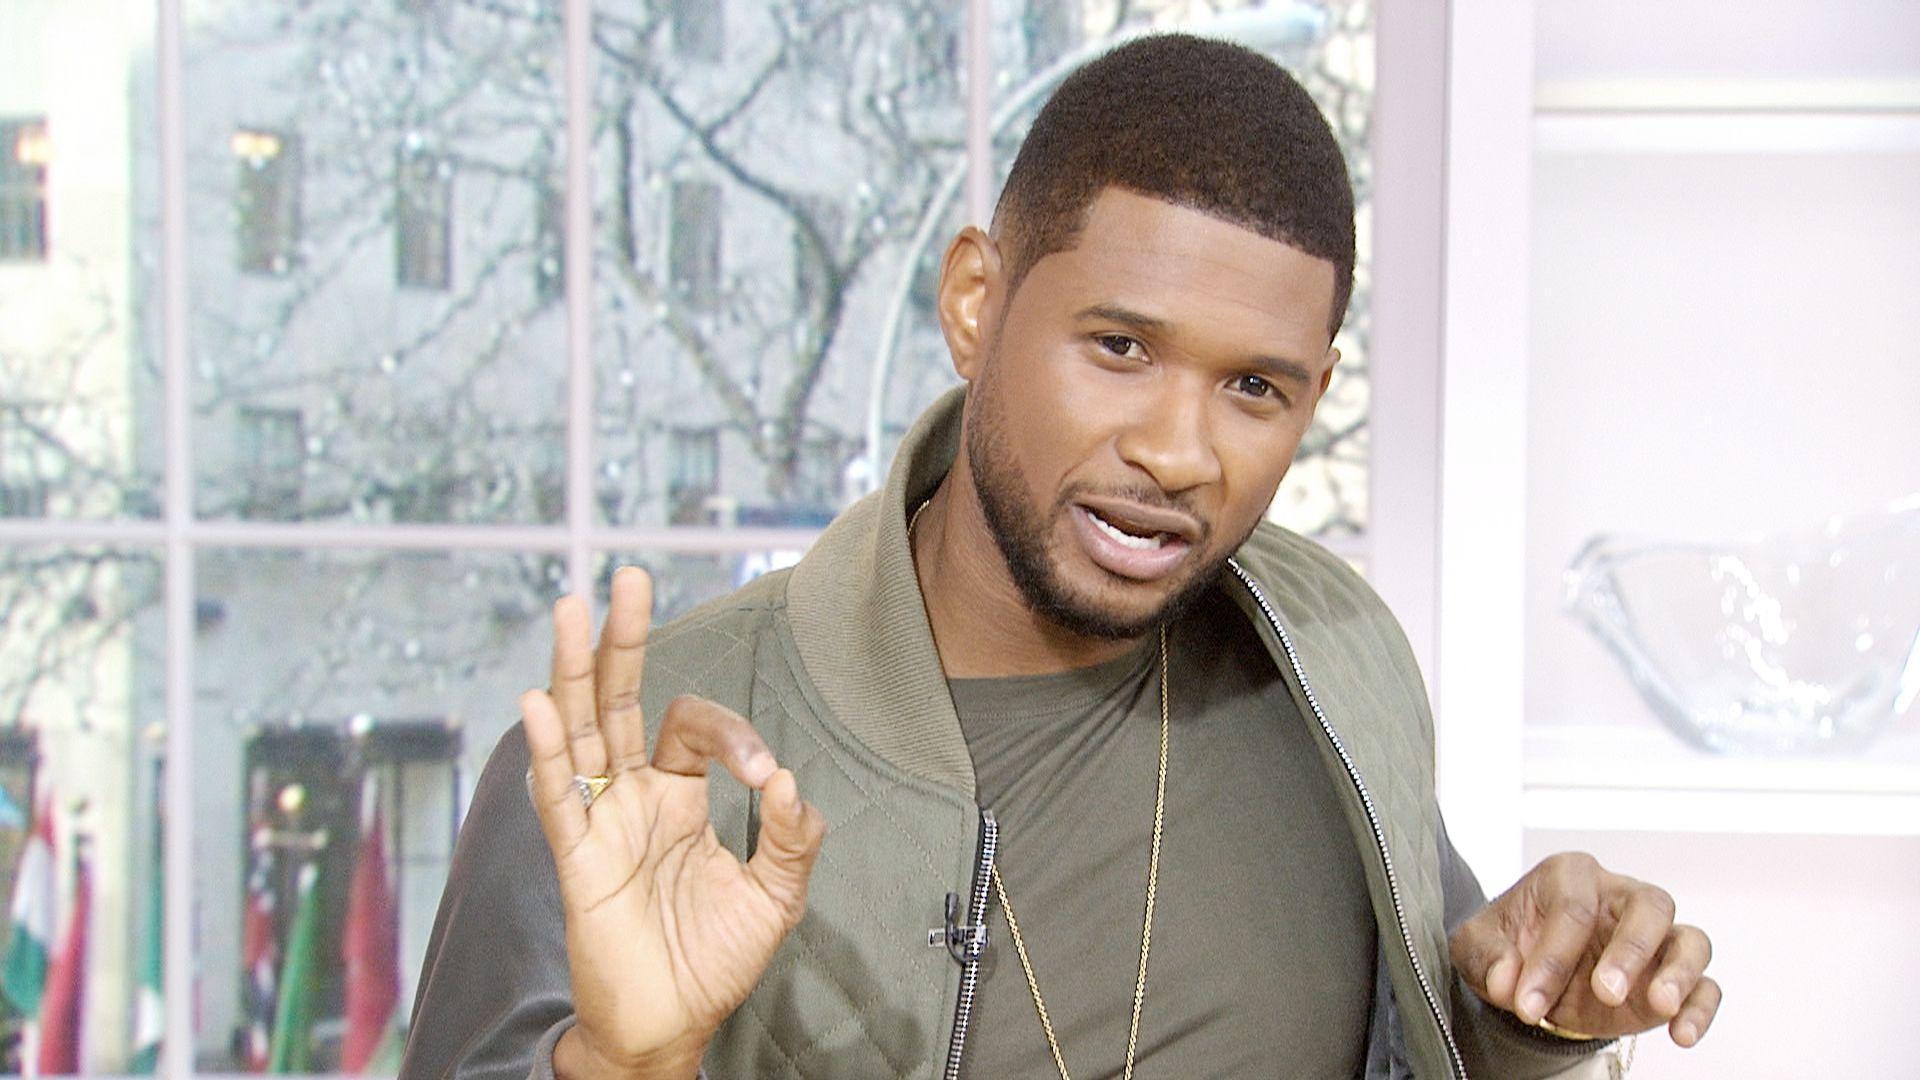 Usher Wallpaper Image Photo Picture Background